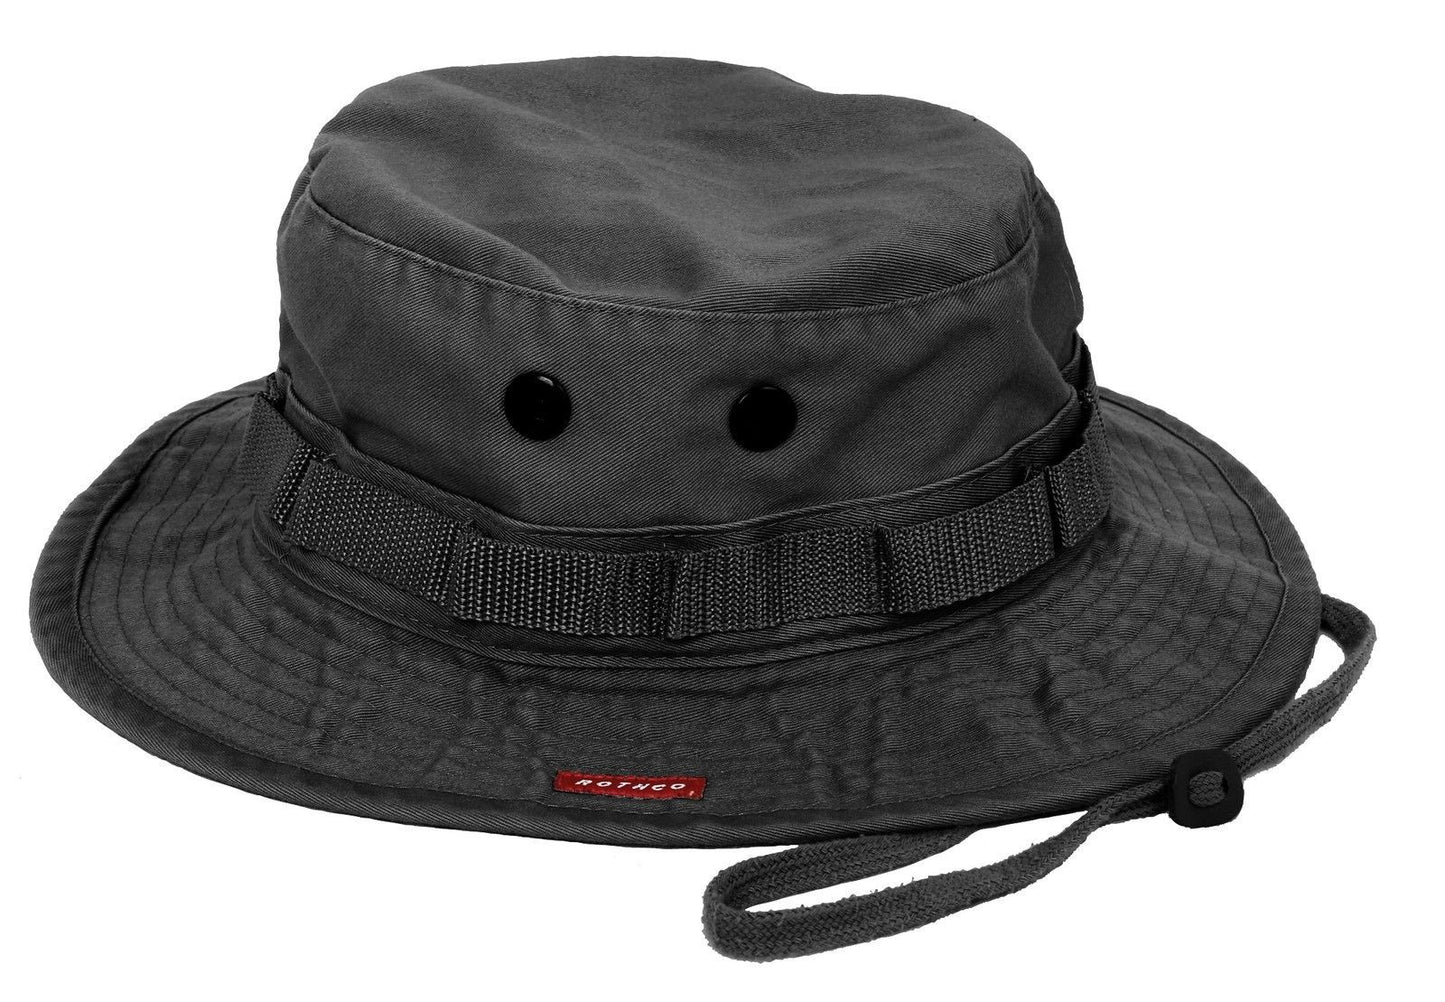 Boonie Hat - Vintage Black Breathable Camping, Fishing, Bucket Hat